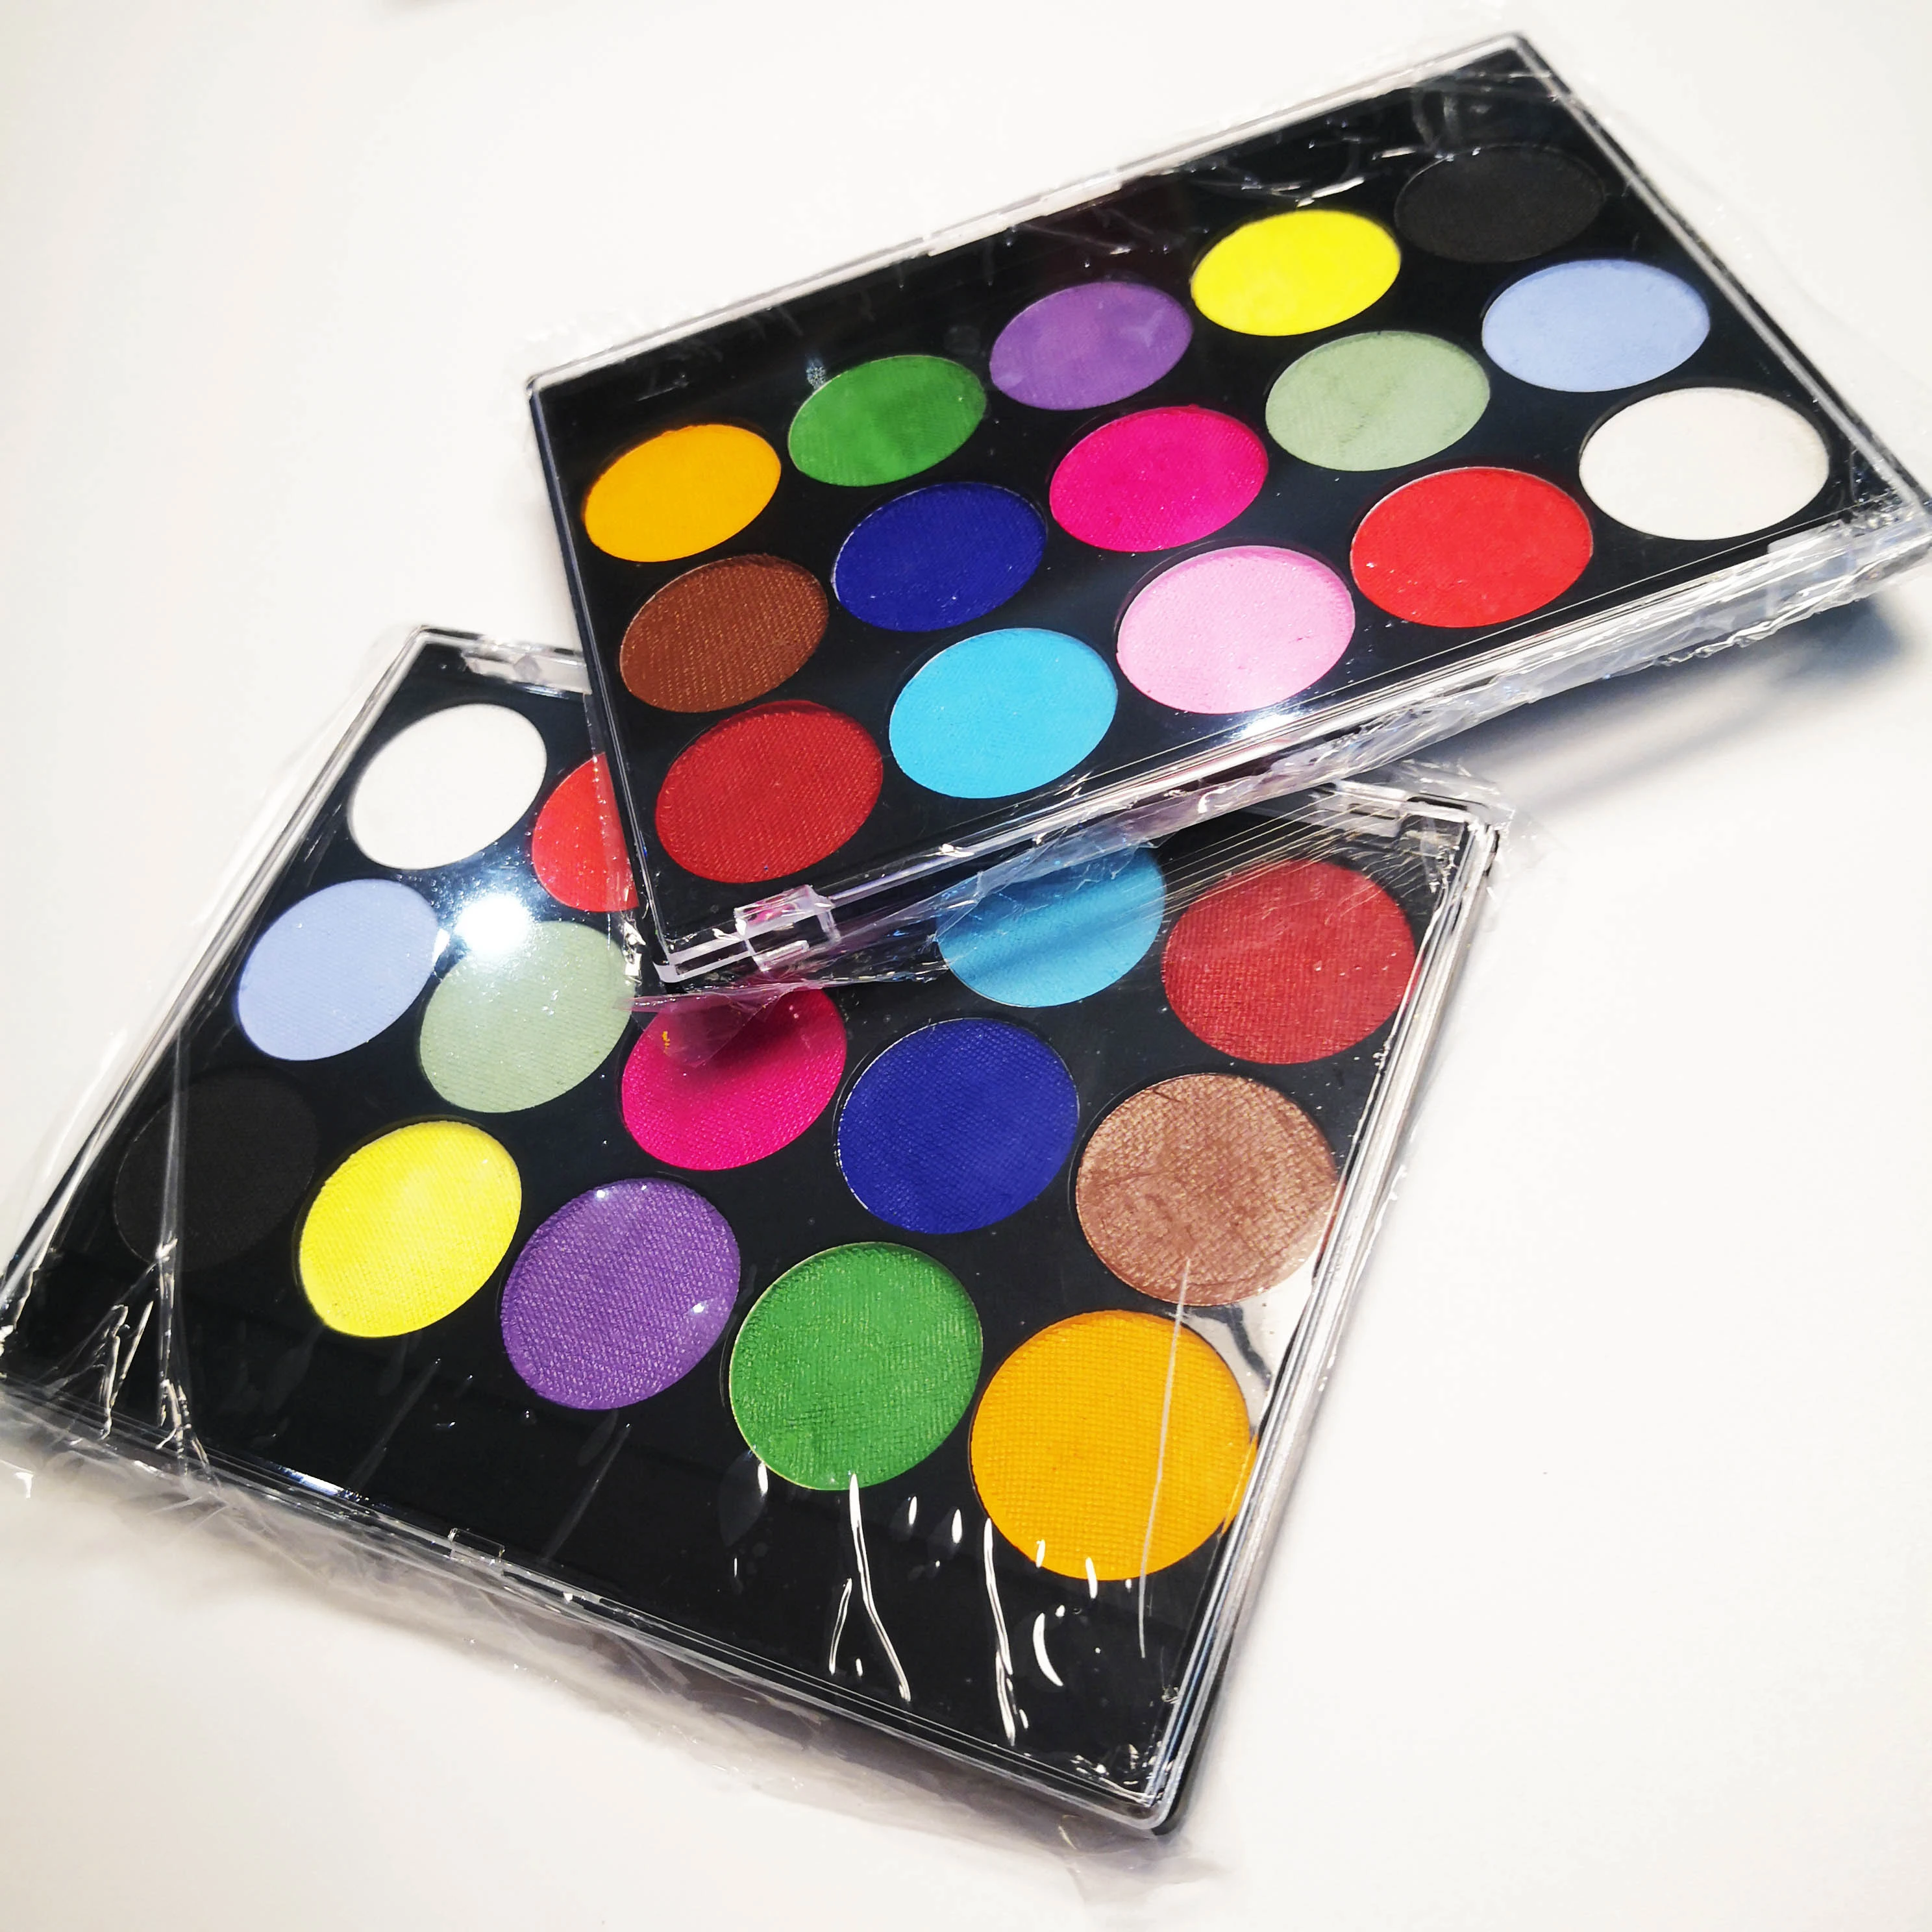 Low MOQ can be customized 15 color body painting palette non-toxic Water based face paint